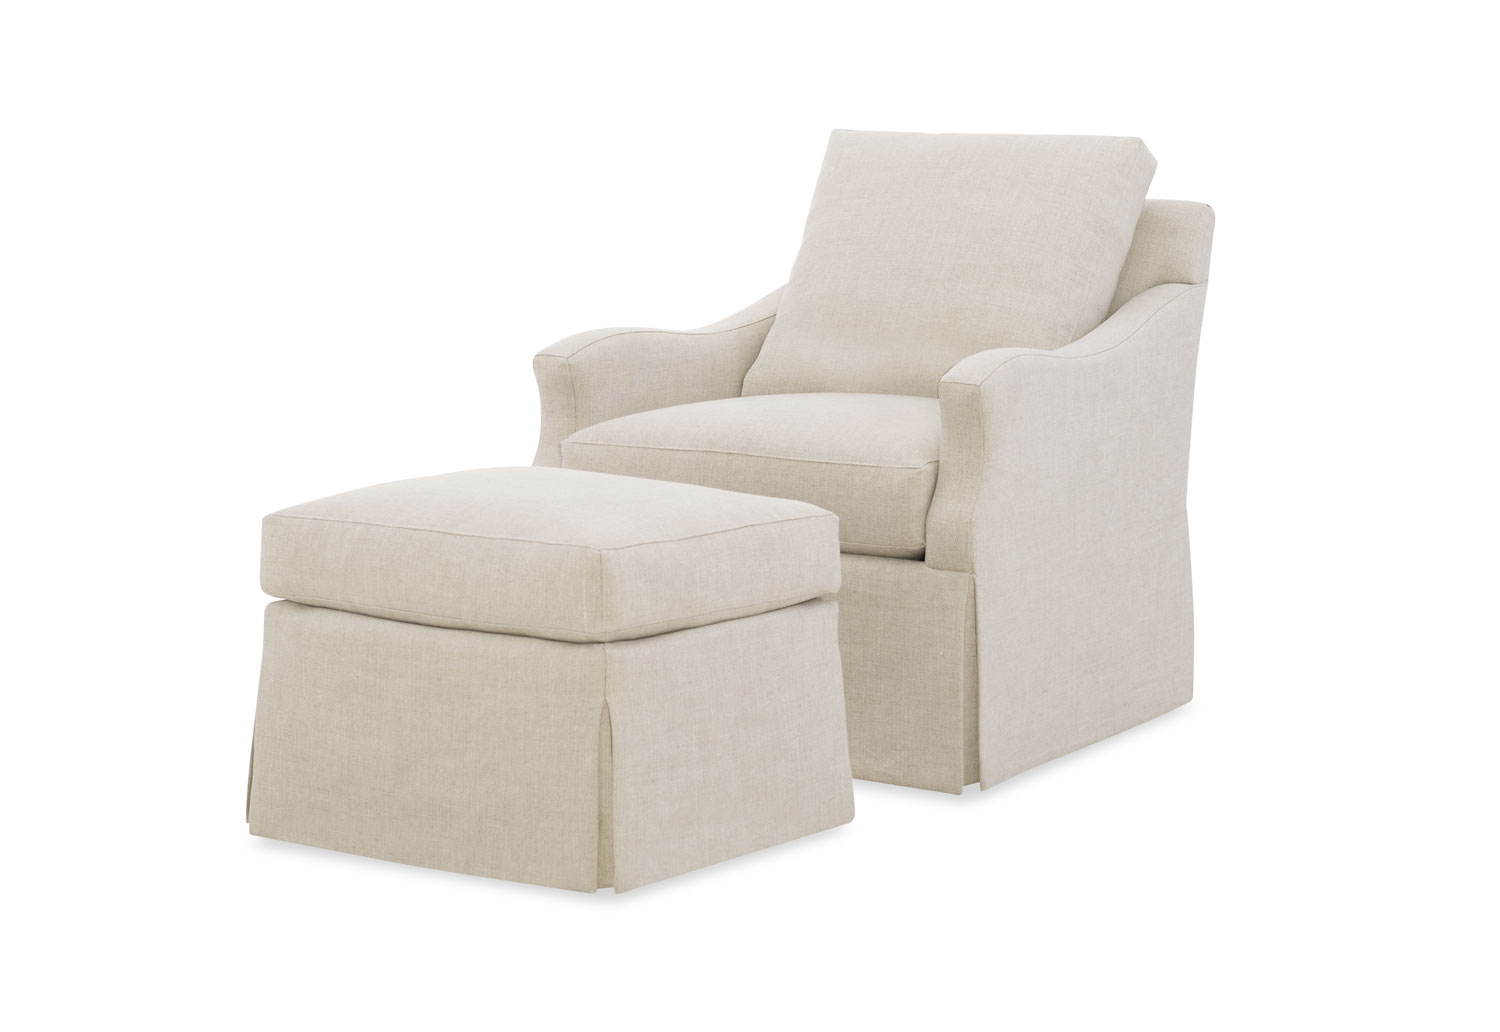 Wesley Hall 2077 Capperson Chair and 2077-23 Capperson Ottoman